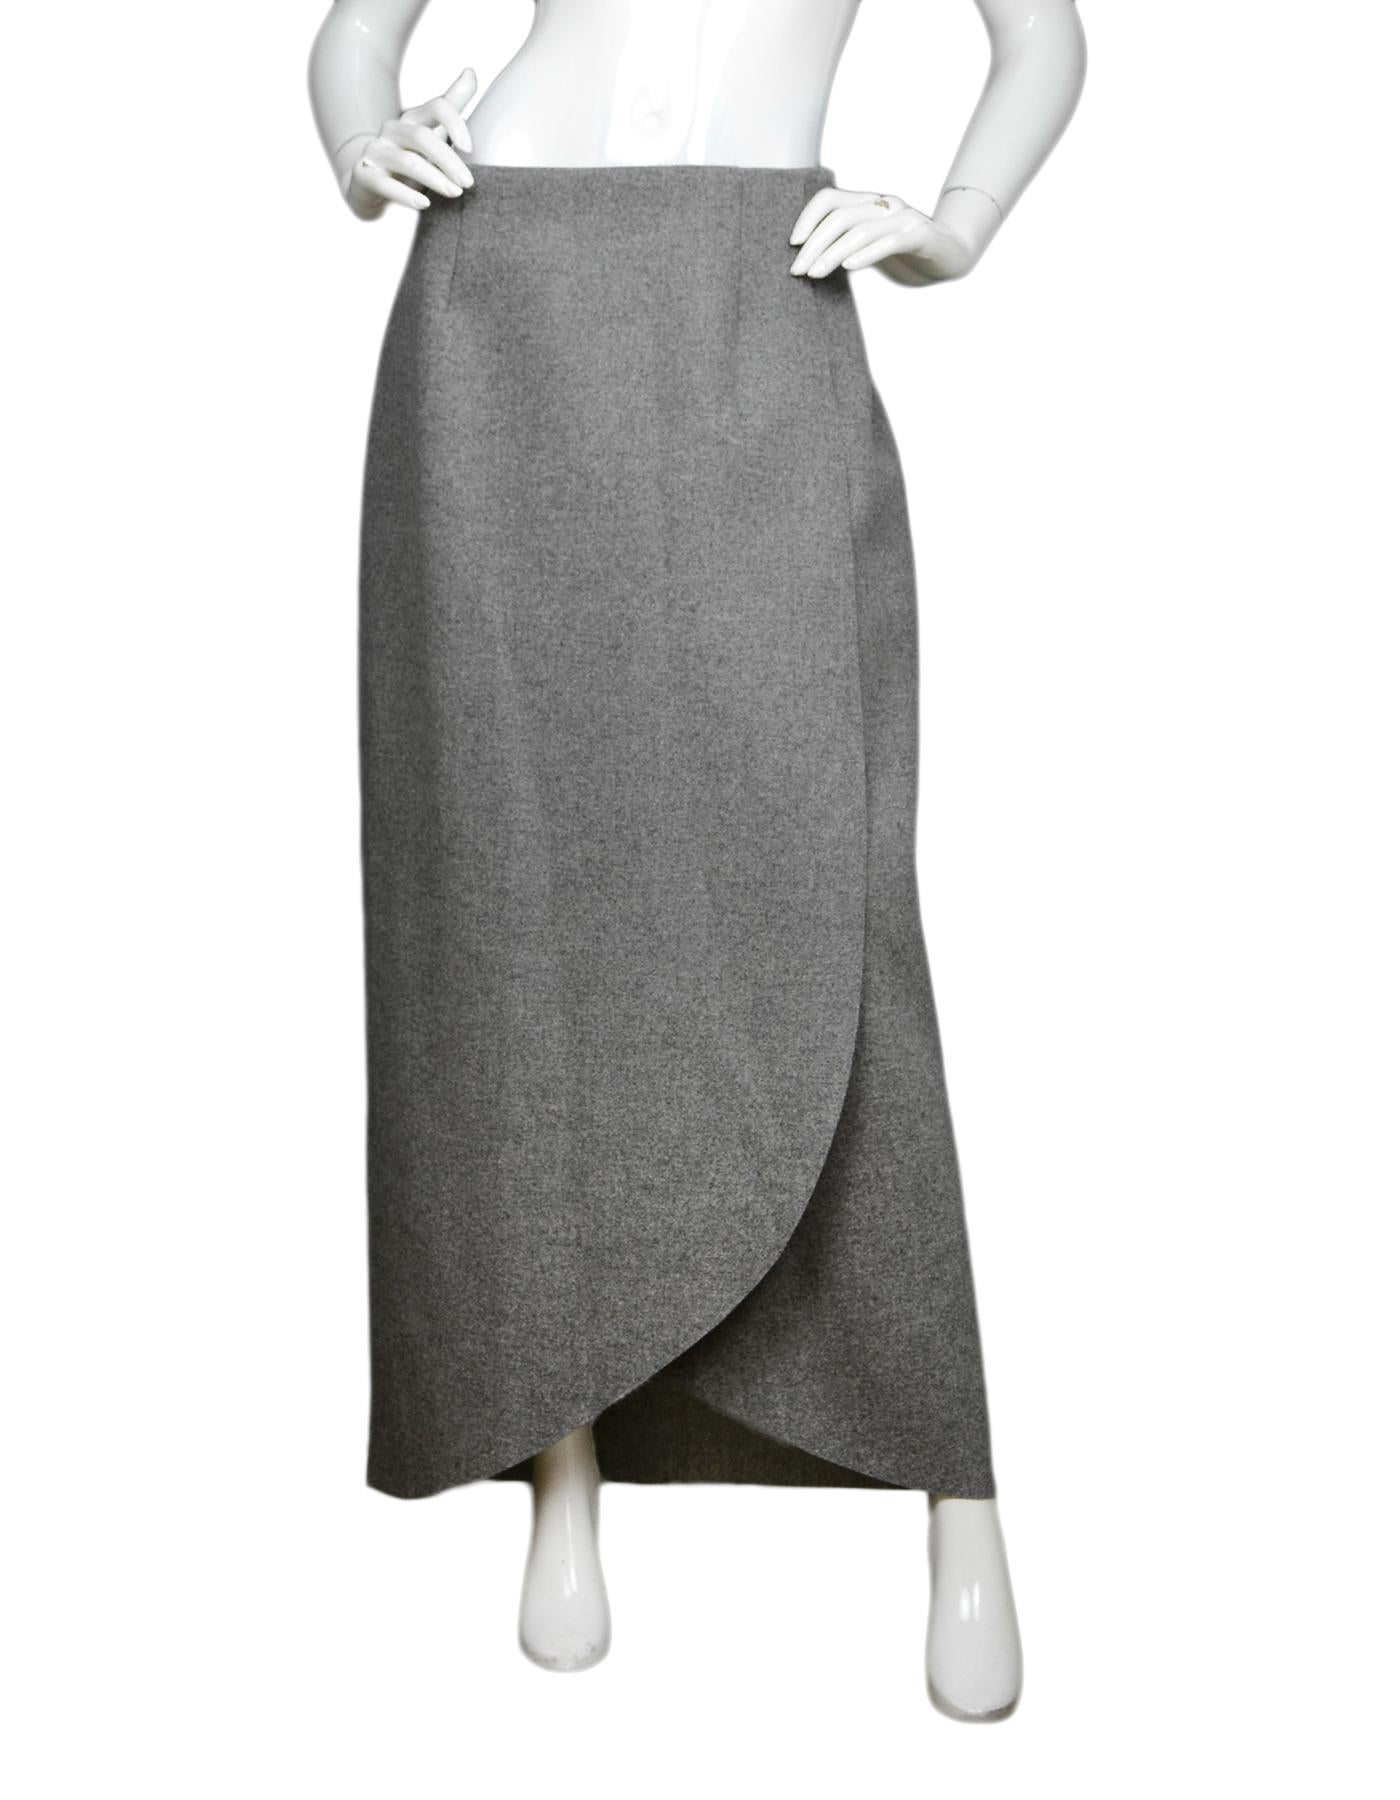 Rosie Assoulin Grey Wrap Wool-Flannel Maxi Skirt NWT Sz 10

Made In:  New York, USA
Color: Grey
Materials: 98% virgin wool, 1% nylon, 1% elastane 
Lining: 100% silk
Closure/Opening: Hidden side zipper with hook eye 
Overall Condition: Excellent